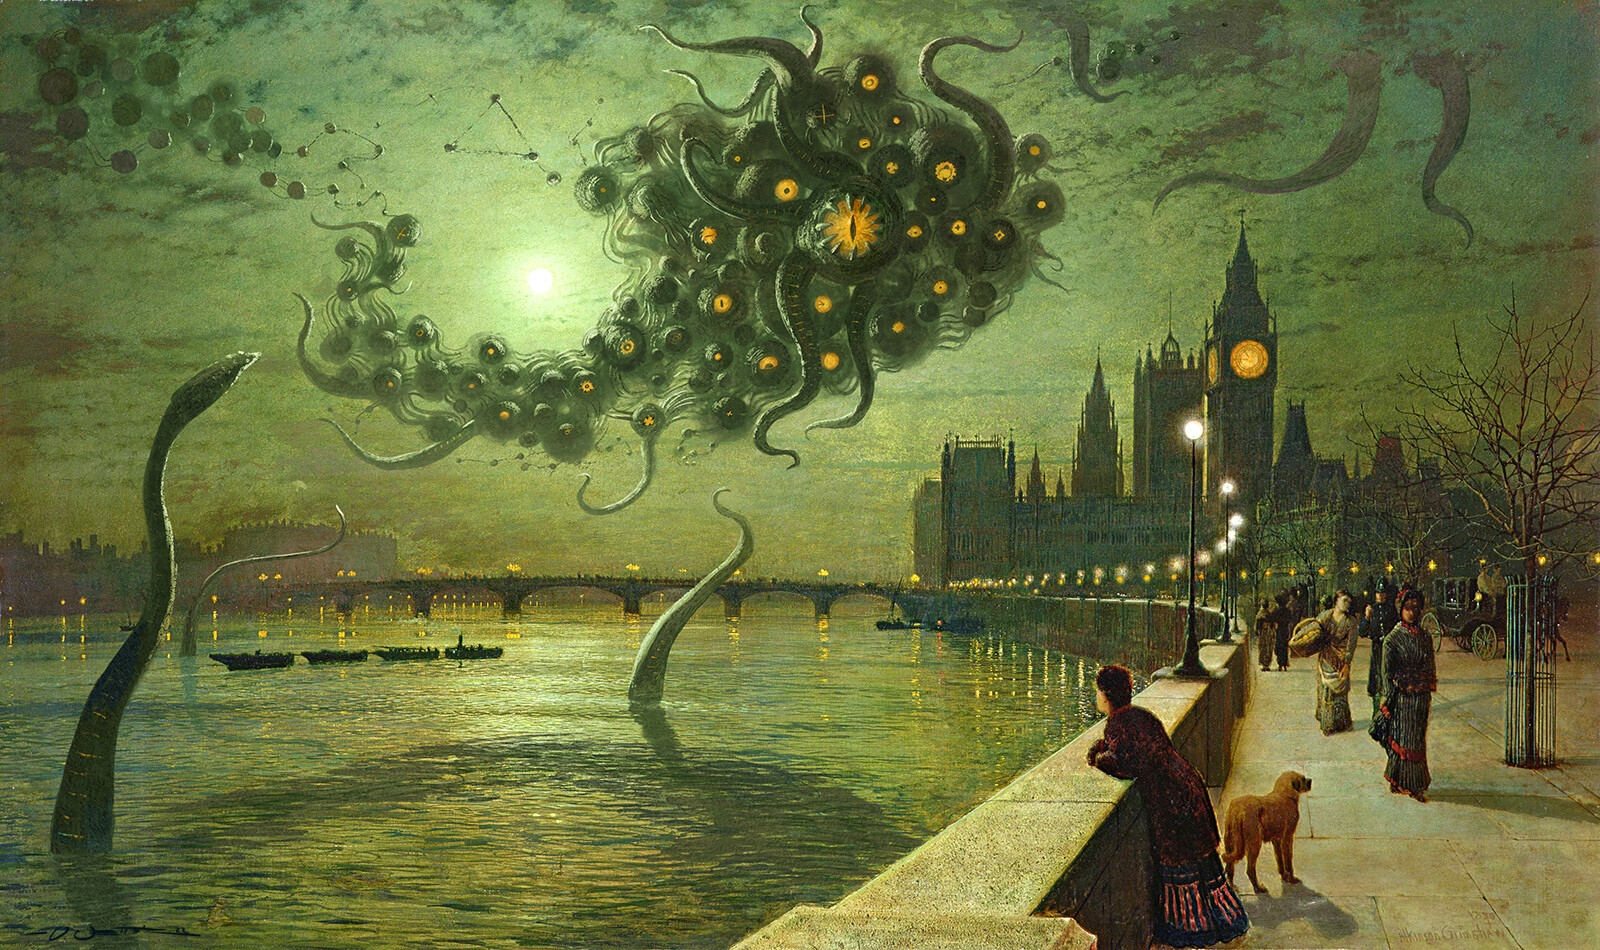 Yog Sothoth floating around its Avatar along the Thames